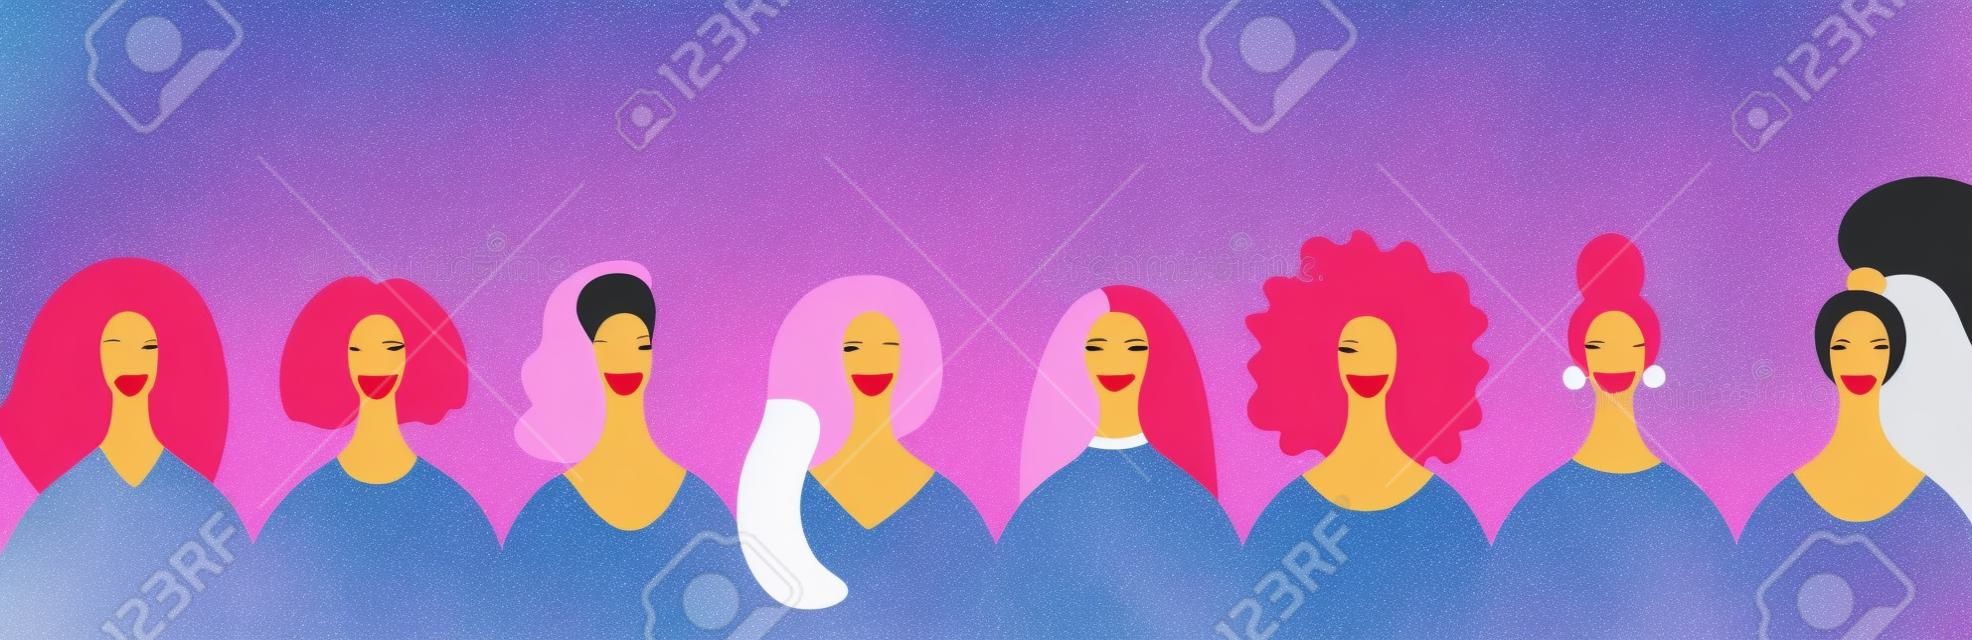 Womens day card, poster, banner, background, with space for text and diverse women faces. Hand drawn vector illustration. Flat style design. Concept, element for feminism, girl power.